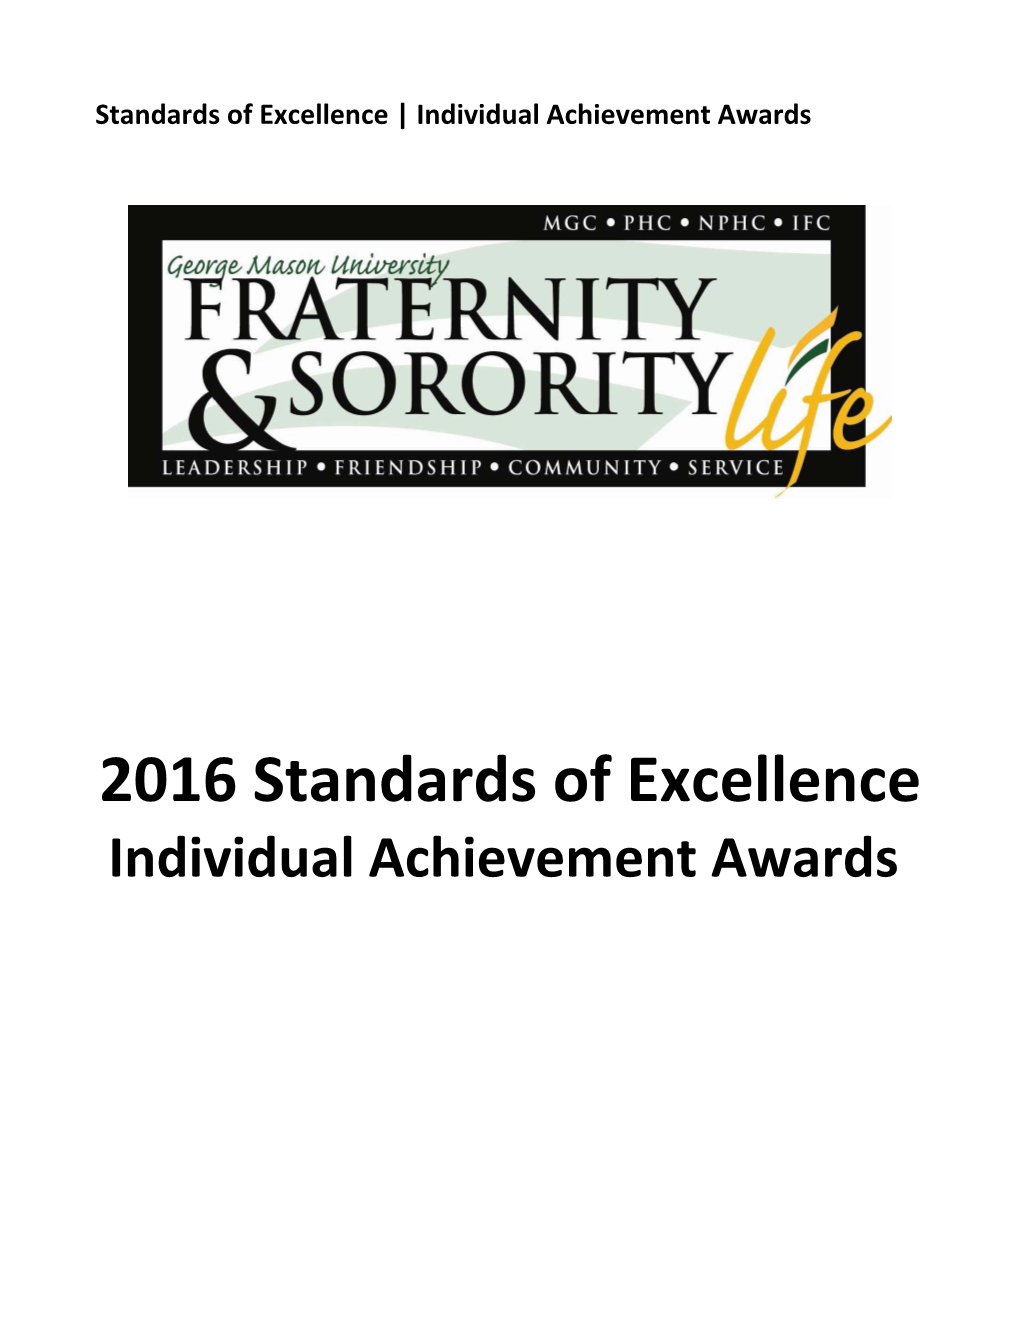 Standards of Excellence Individual Achievement Awards